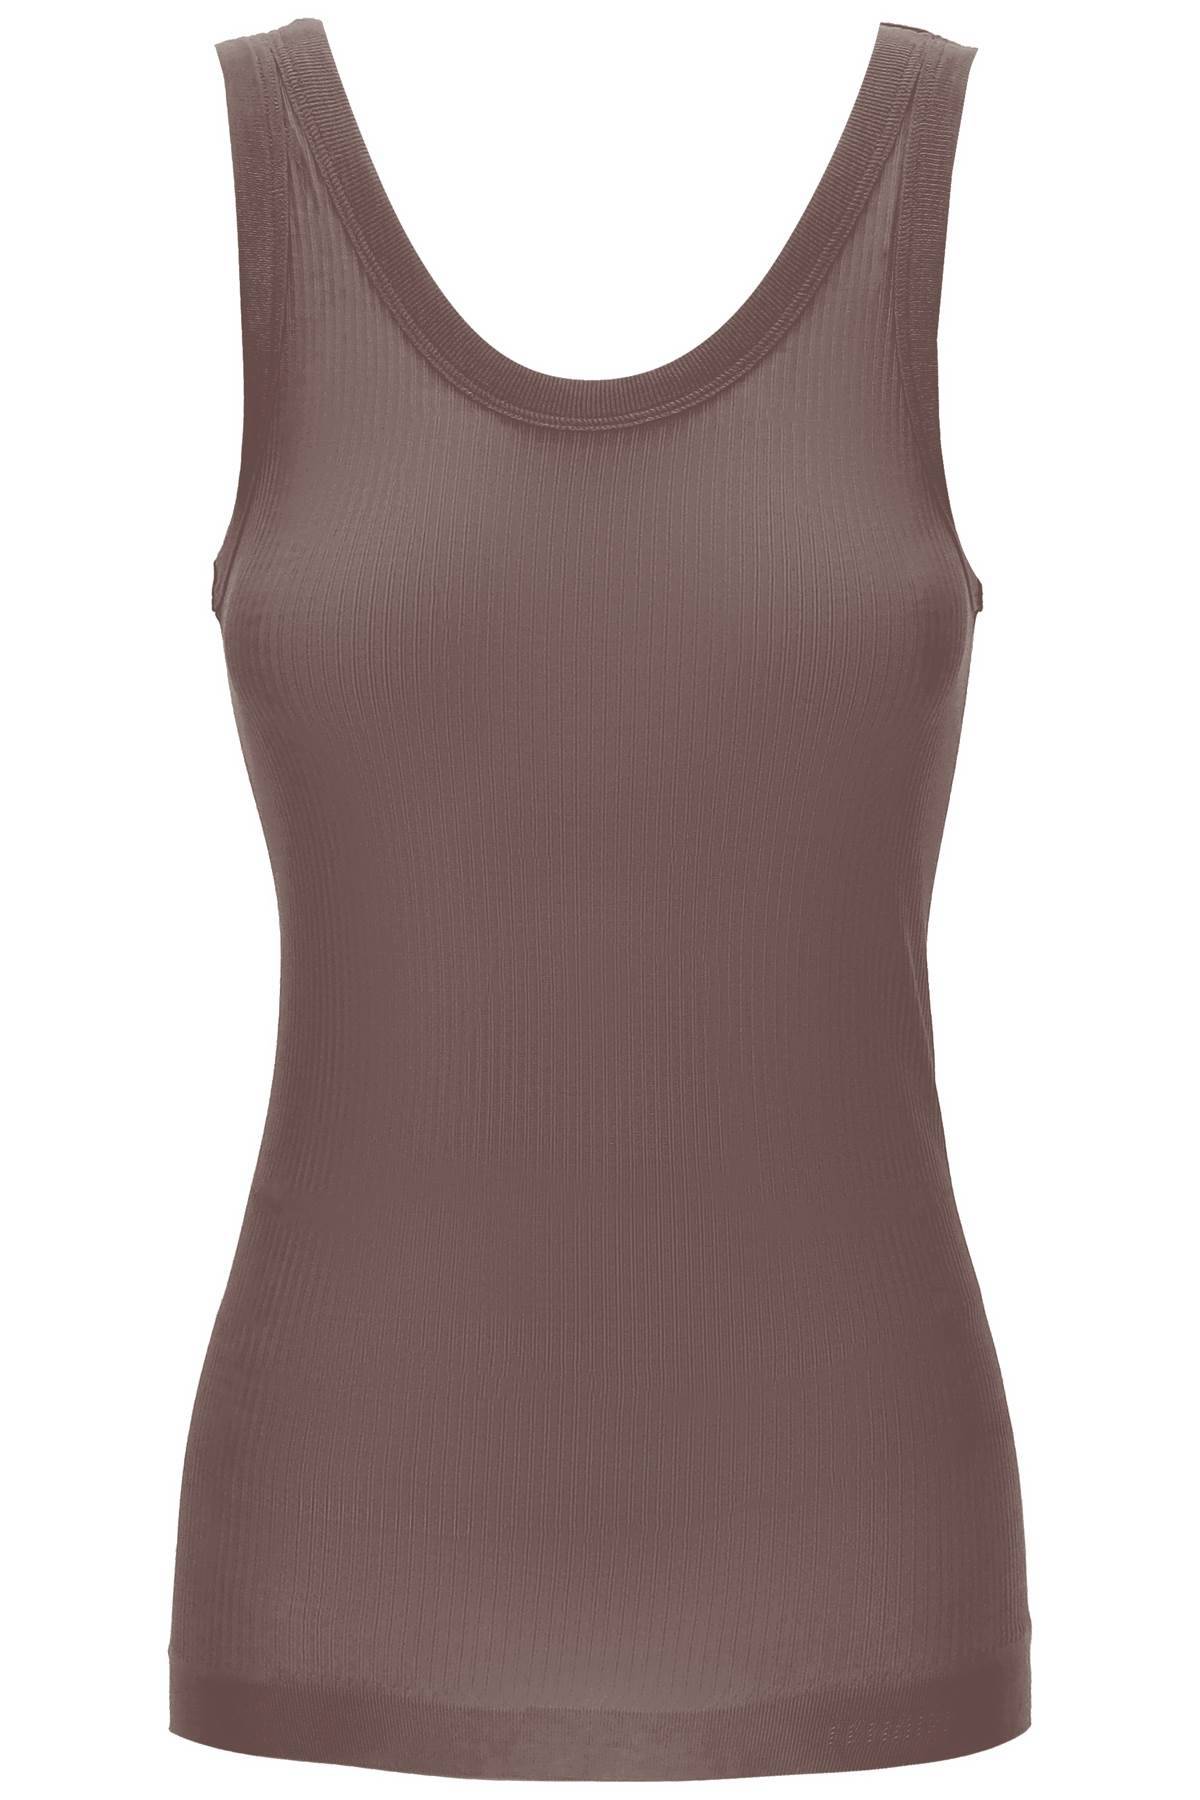 Lemaire LEMAIRE seamless sleeveless top